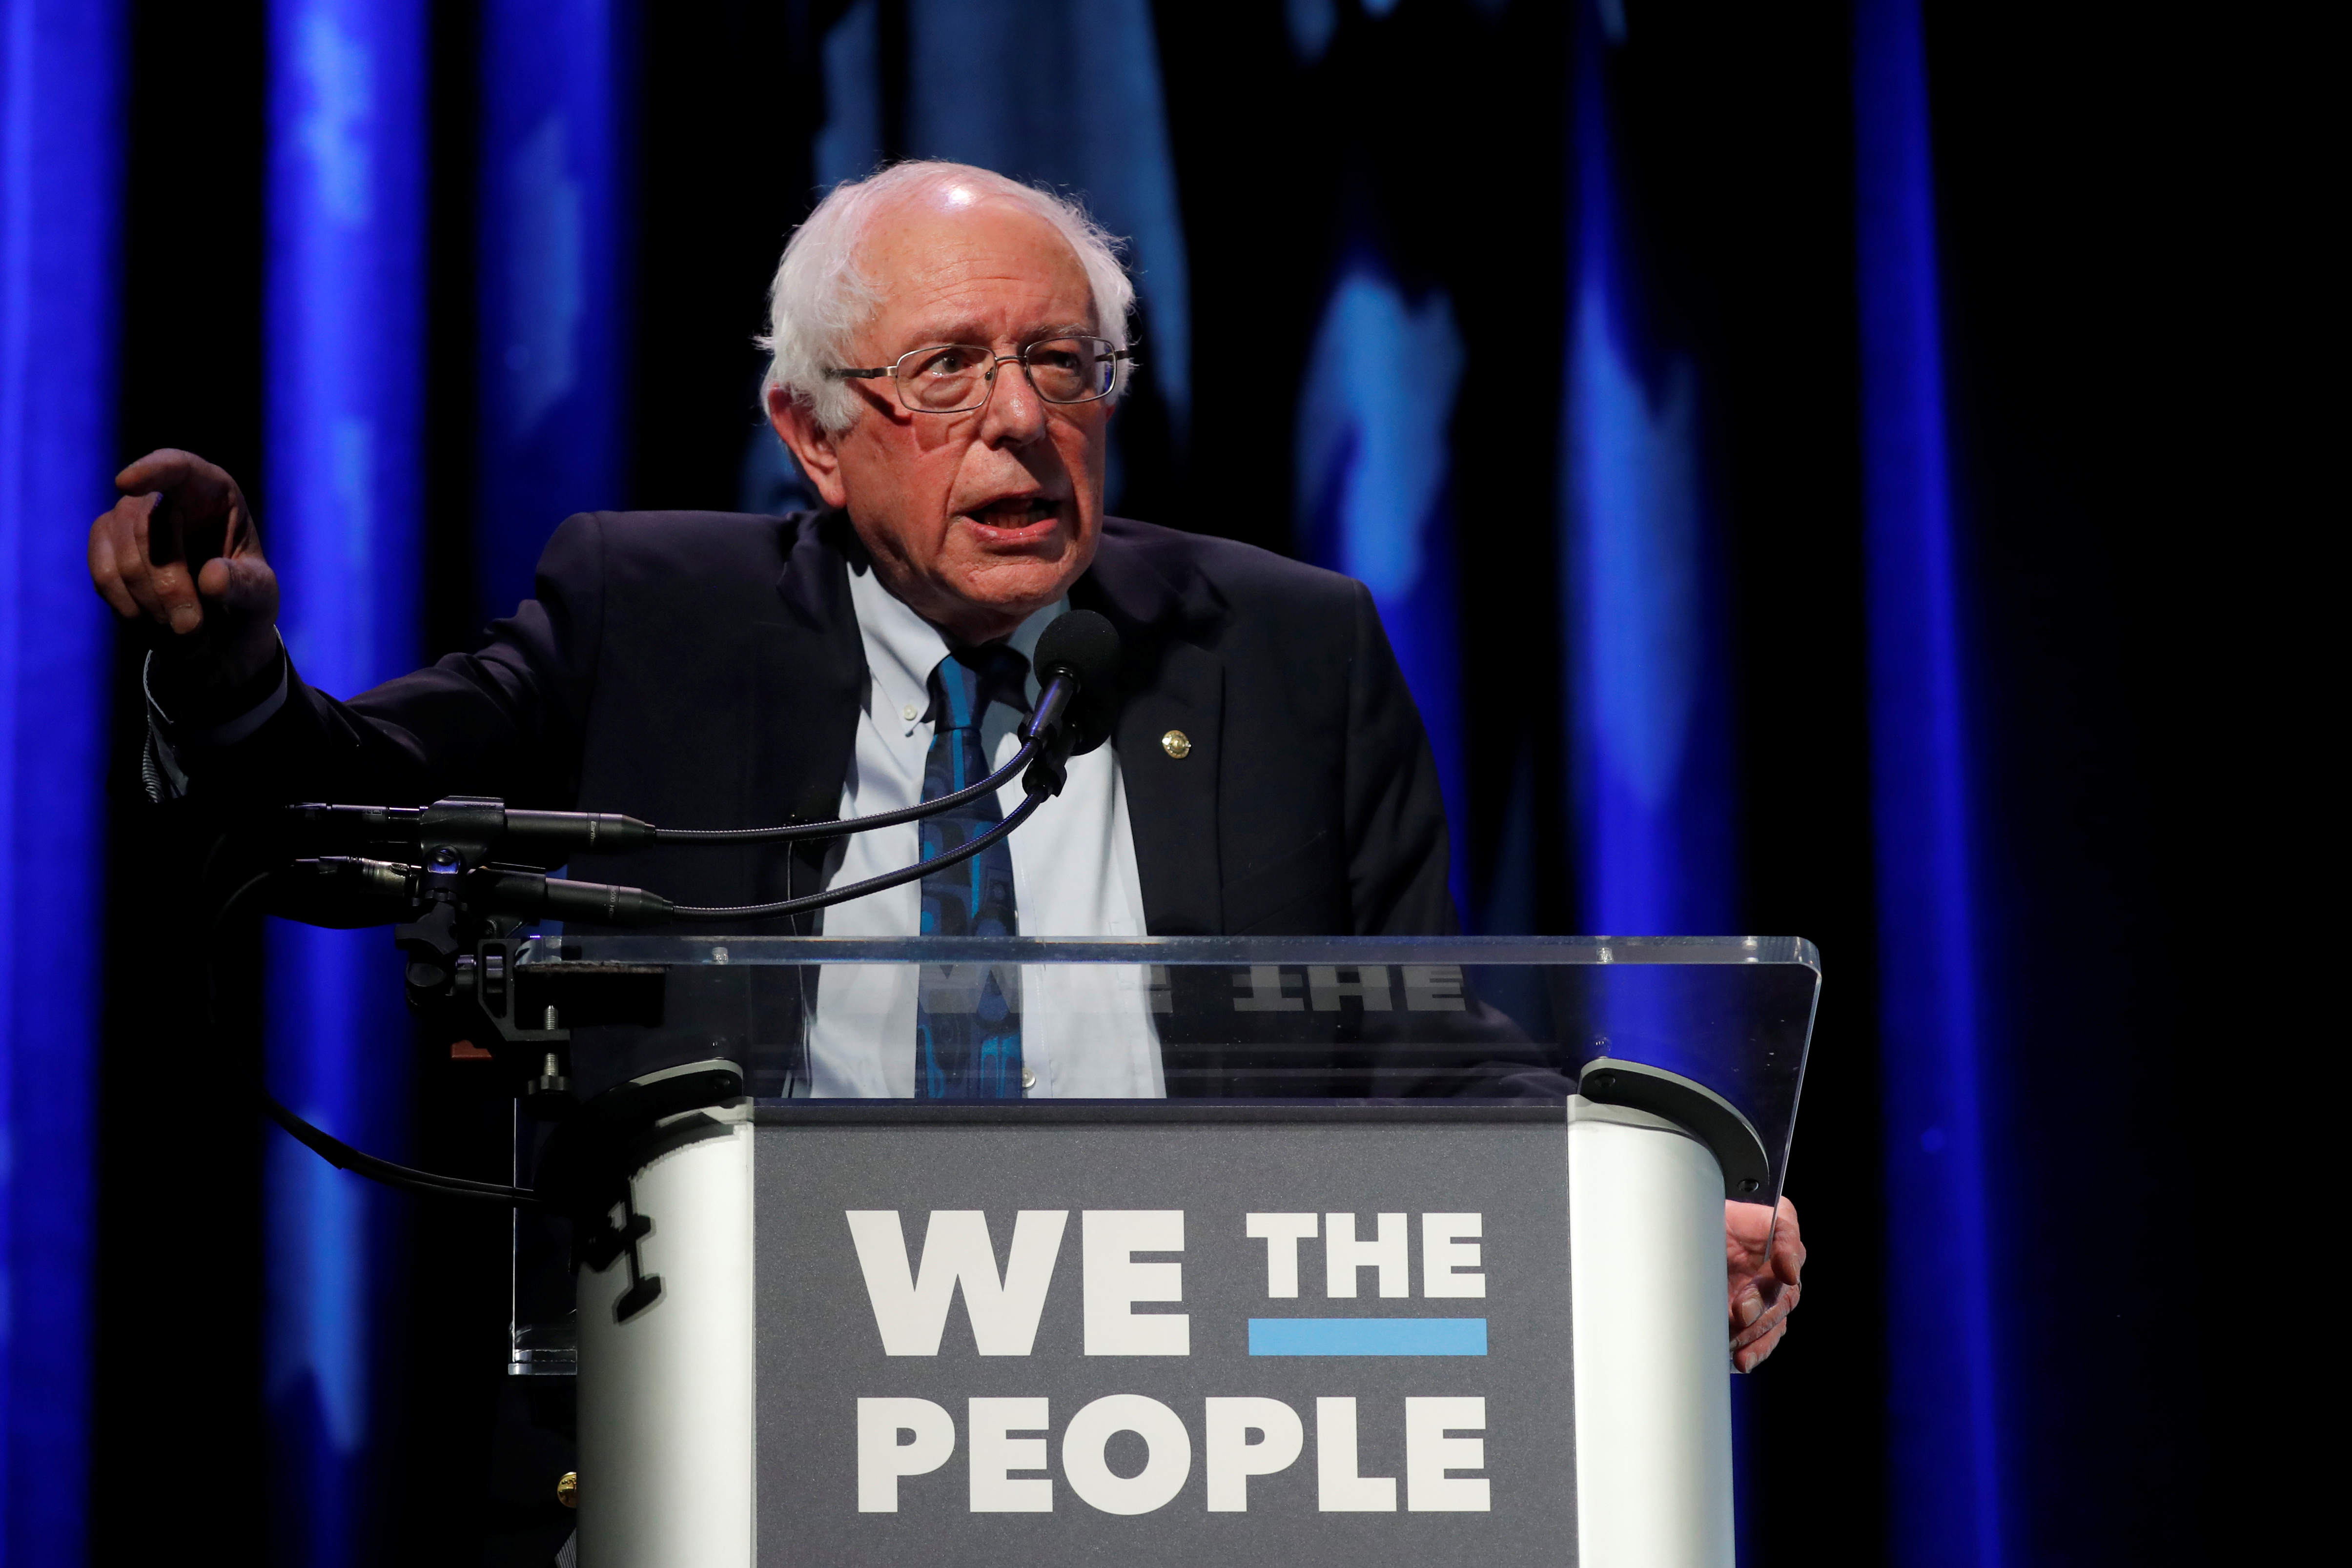 U.S. 2020 Democratic presidential candidate and Senator Bernie Sanders participates in a moderated discussion at the We the People Summit in Washington